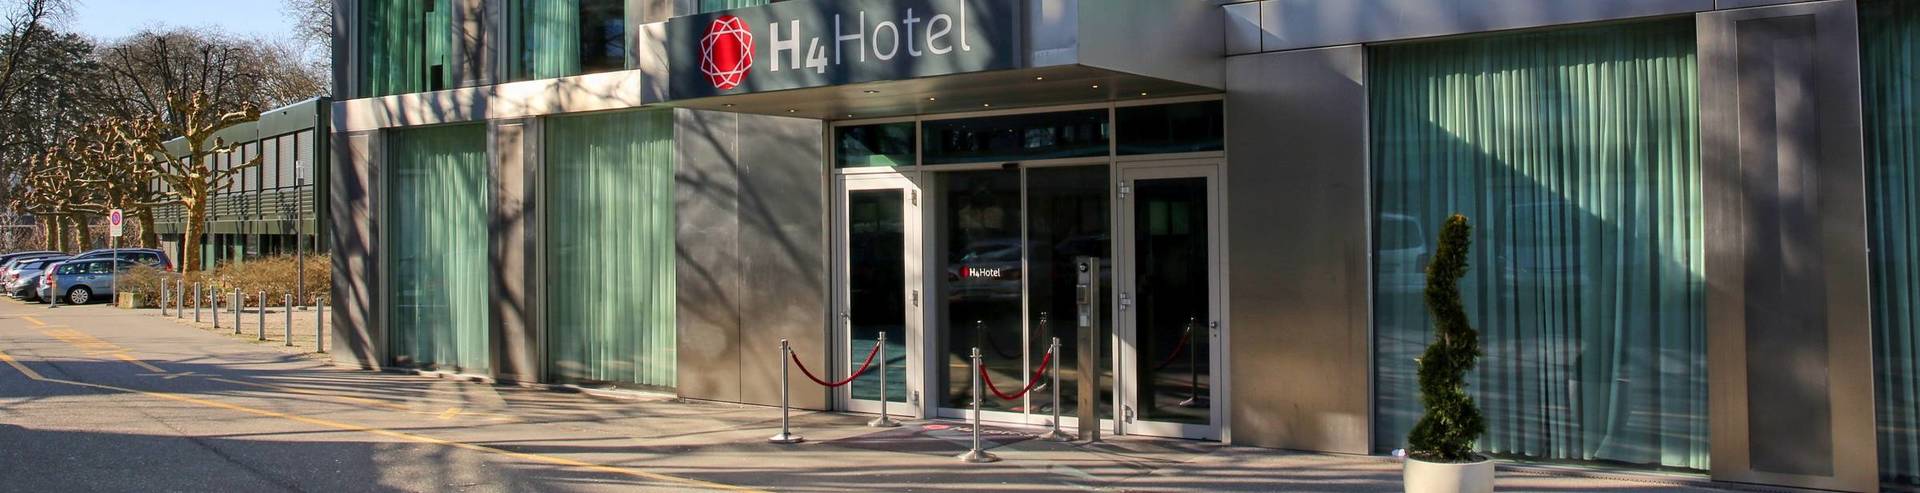 Eingang des H4 Hotel Solothurn - Offizielle Webseite